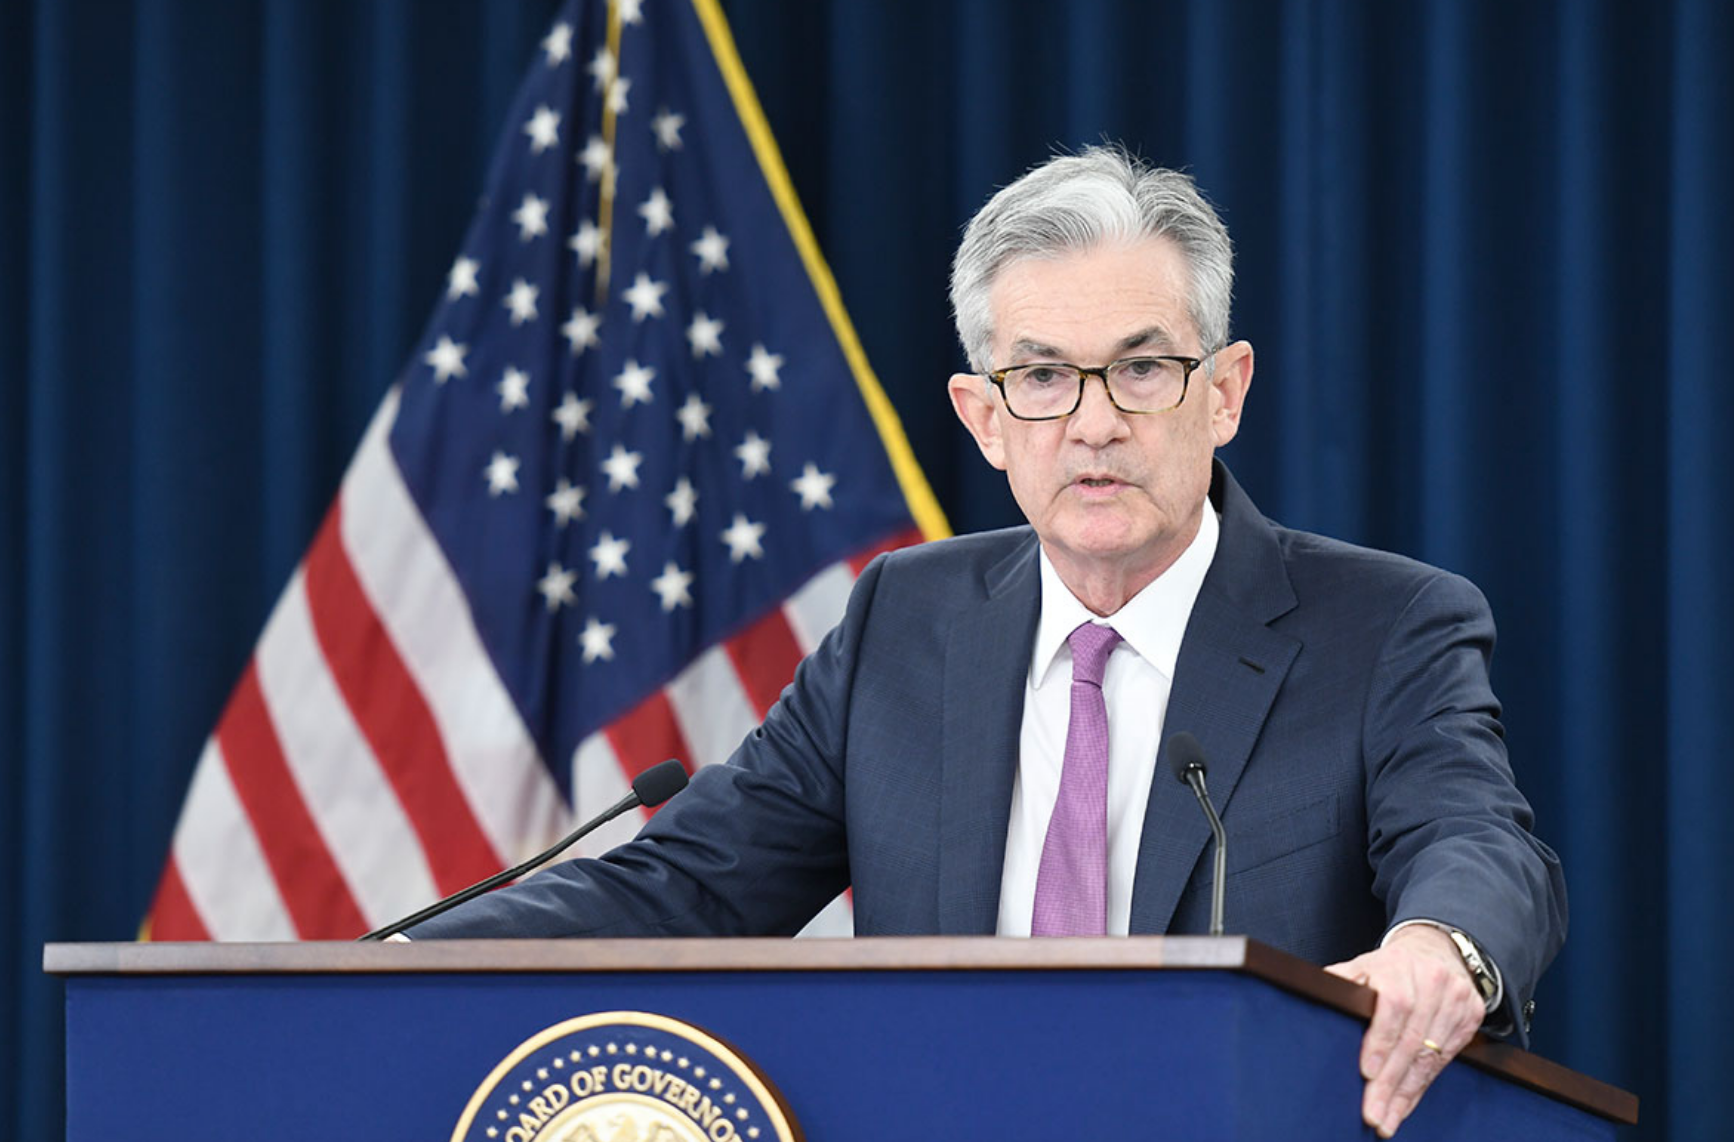 https://img3.s3wfg.com/web/img/images_uploaded/5/e/fed-jerome-powell-reserve-federale.png